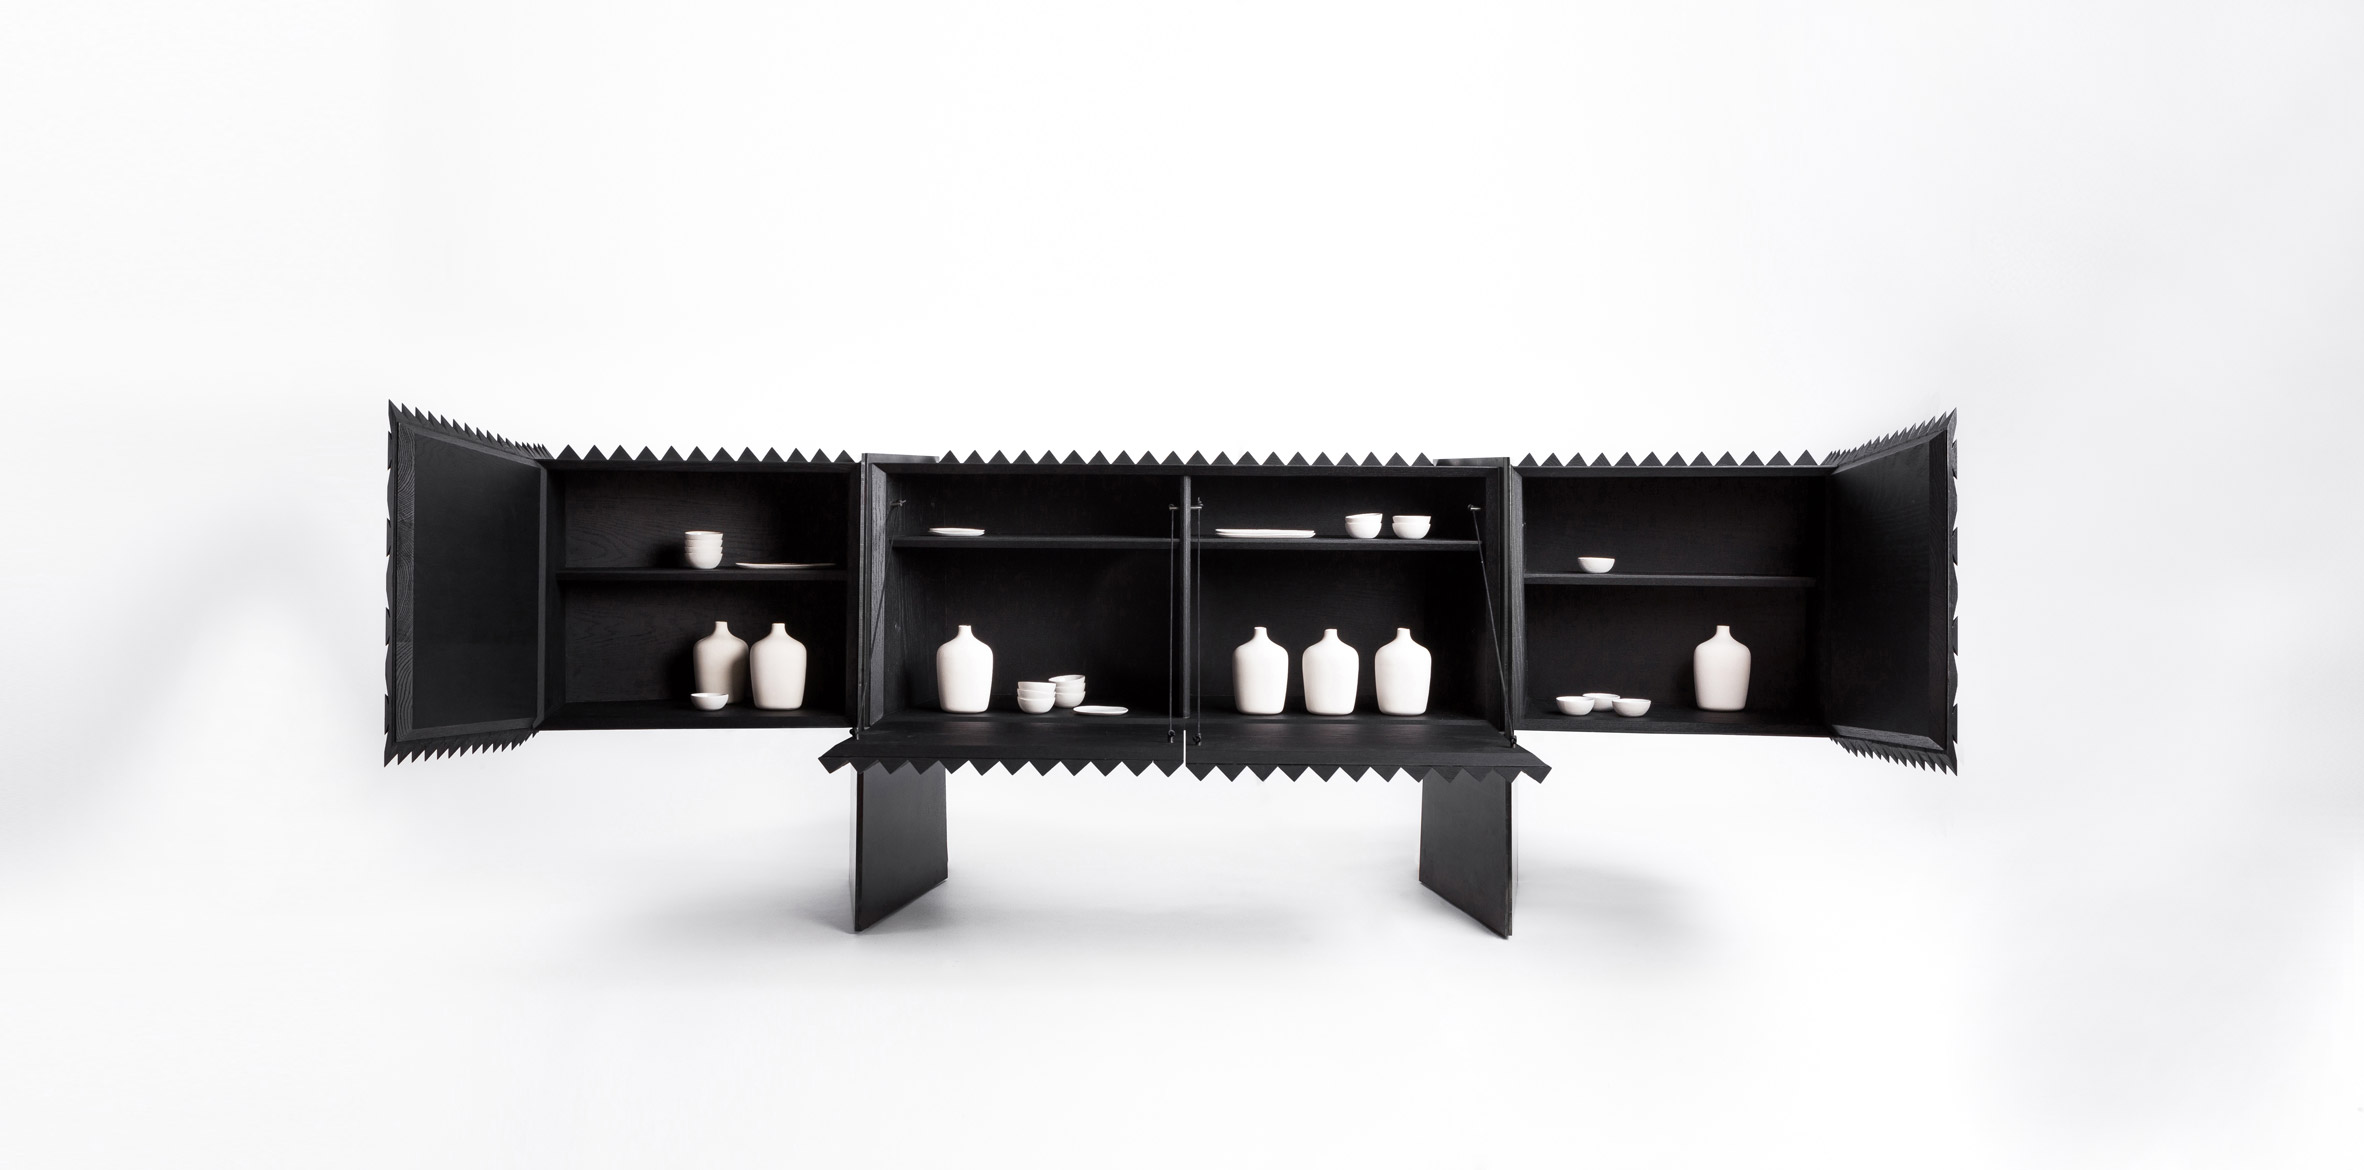 agave-collection-by-esrawe-mezcal-cabinet-mexico_dezeen_31